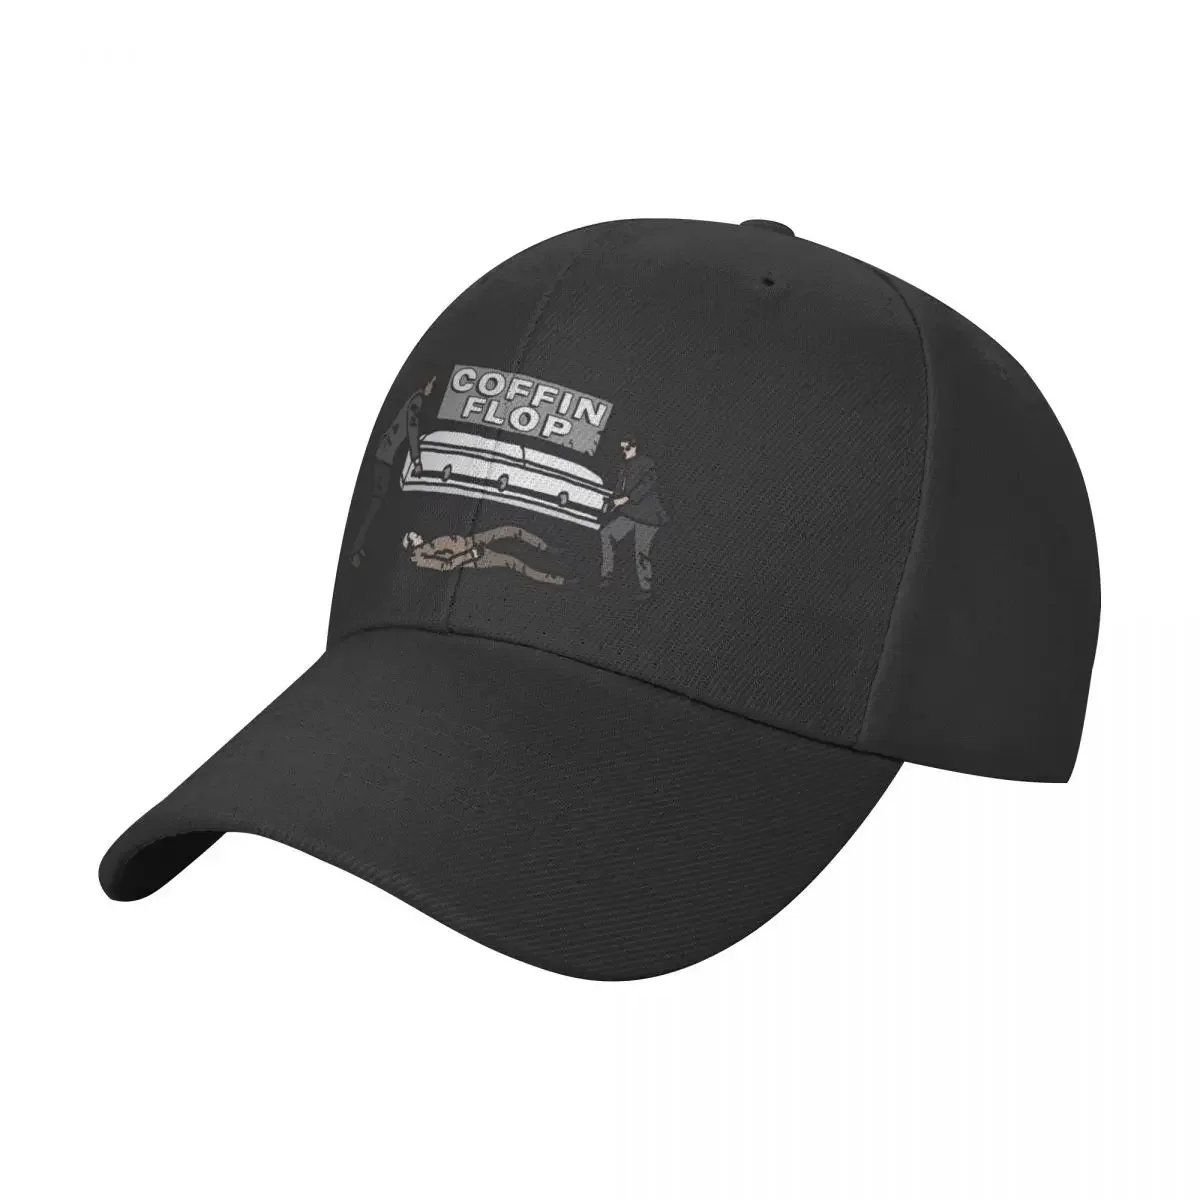 

Coffin Flop (I Think You Should Leave) Baseball Cap Thermal Visor birthday Dropshipping For Man Women's